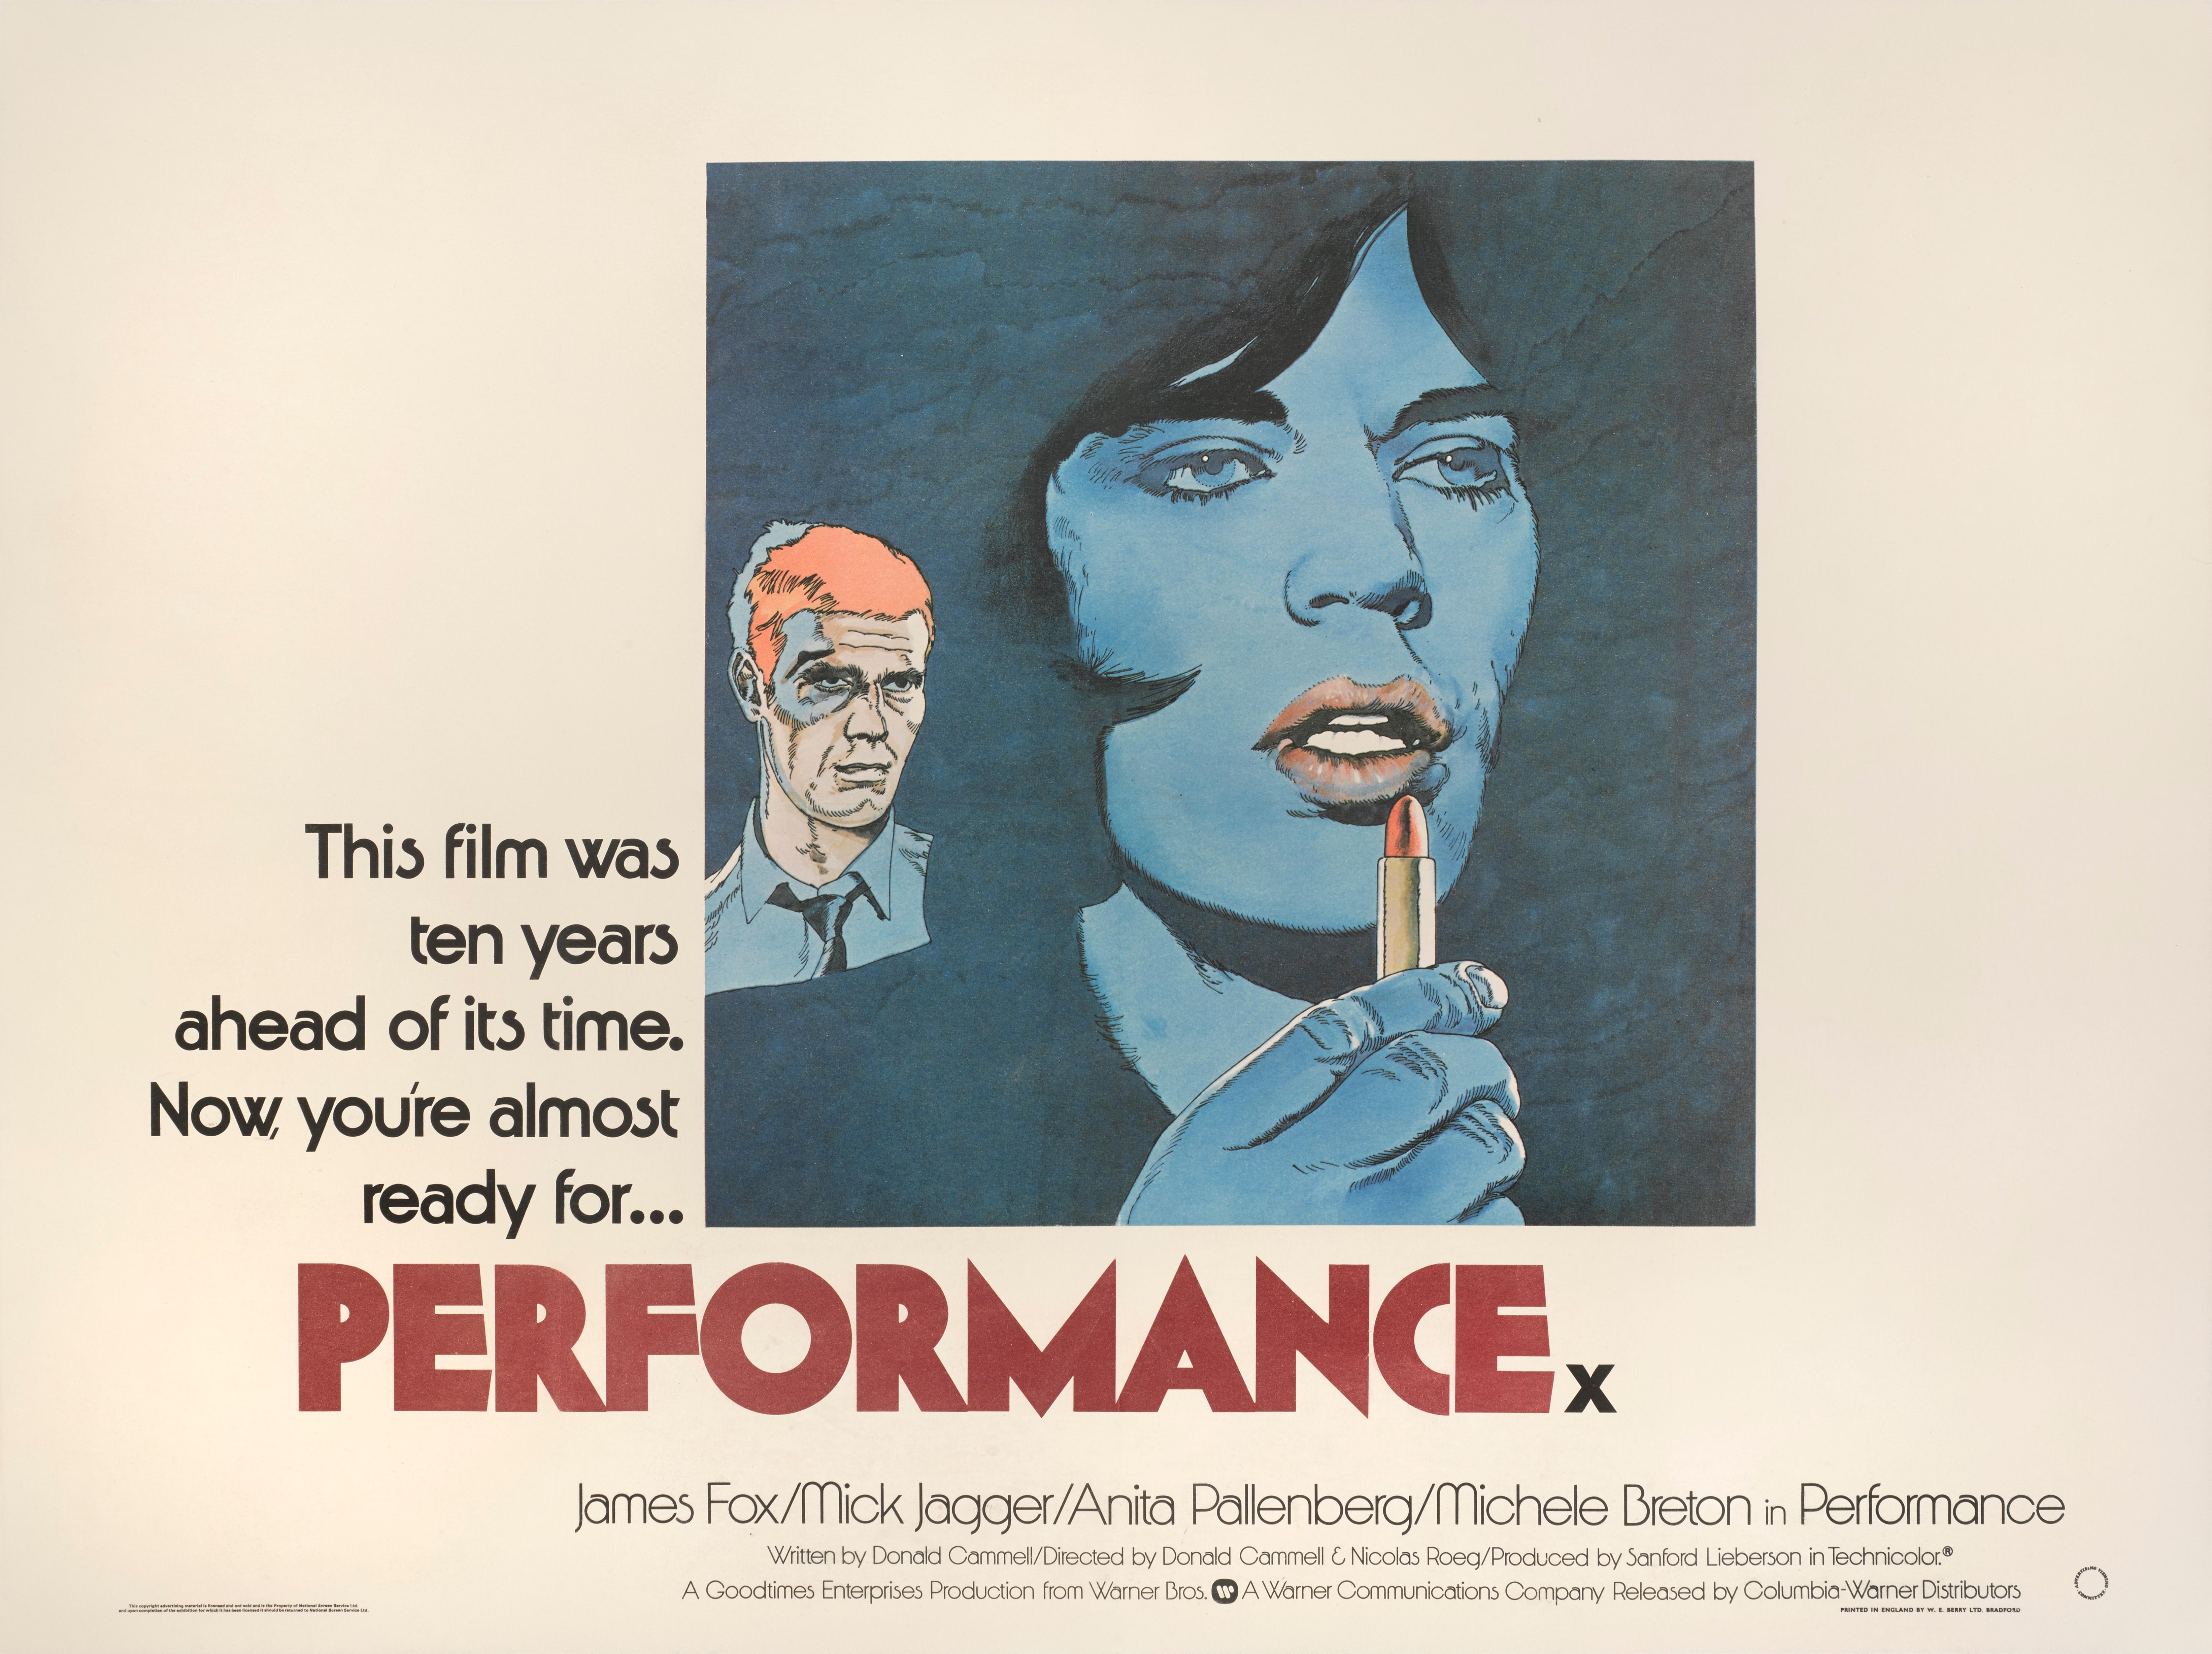 Original British film poster for Performance 1971.
This film starred James Fox and  Mick Jagger and was directed by Donald Cammell and Nicolas Roeg. This poster was created for the films re-release in 1978 and fetures the very best art work on any